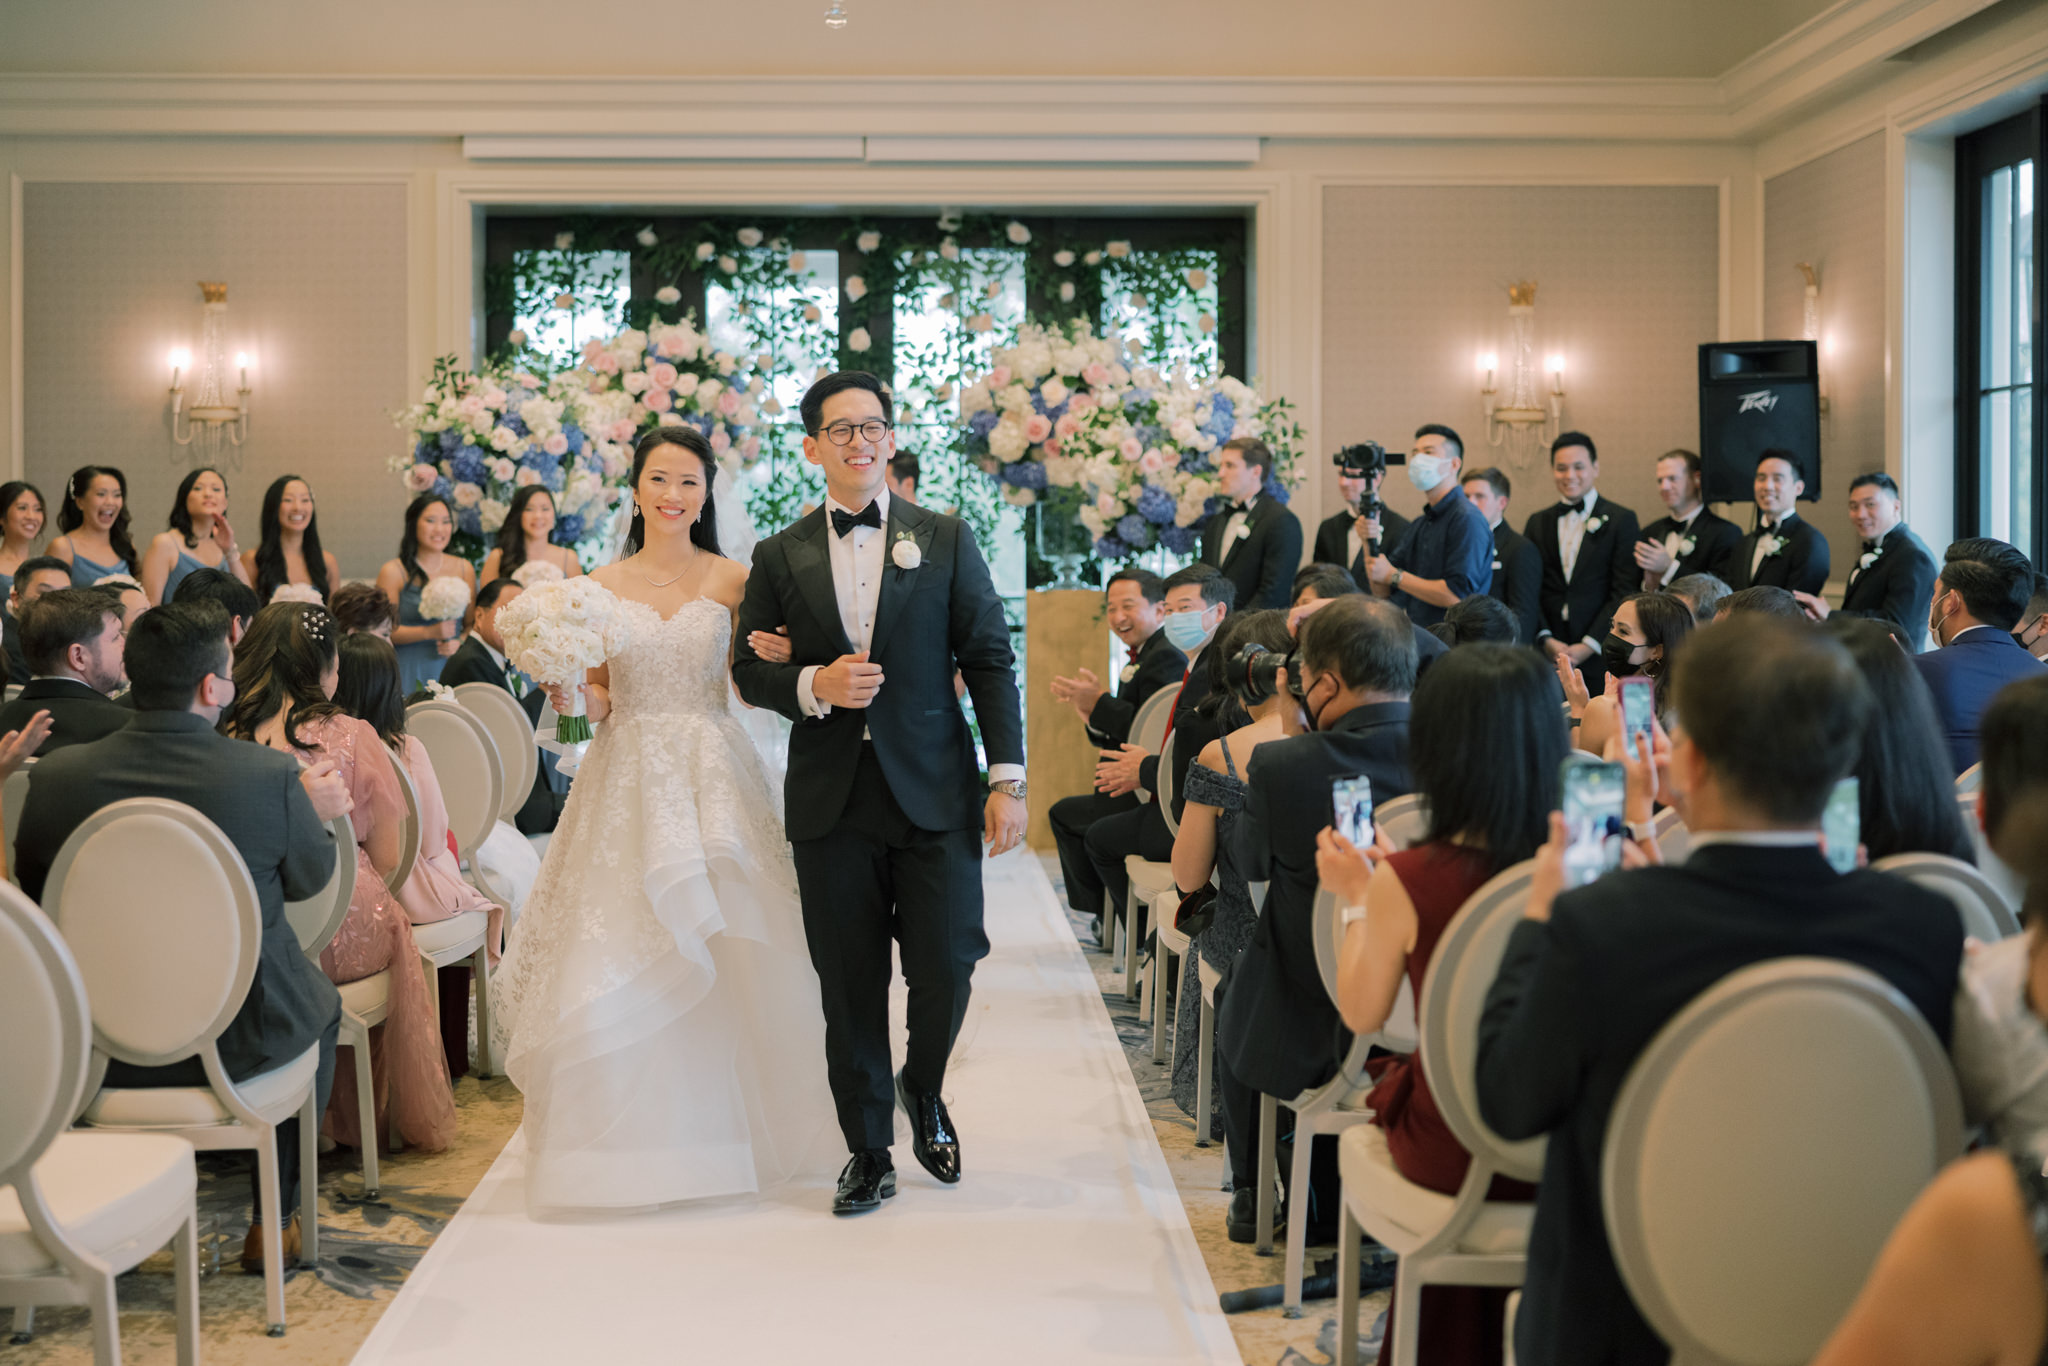 The bride and groom are happily walking away from the aisle as the guests cheer on. Image by Jenny Fu Studio